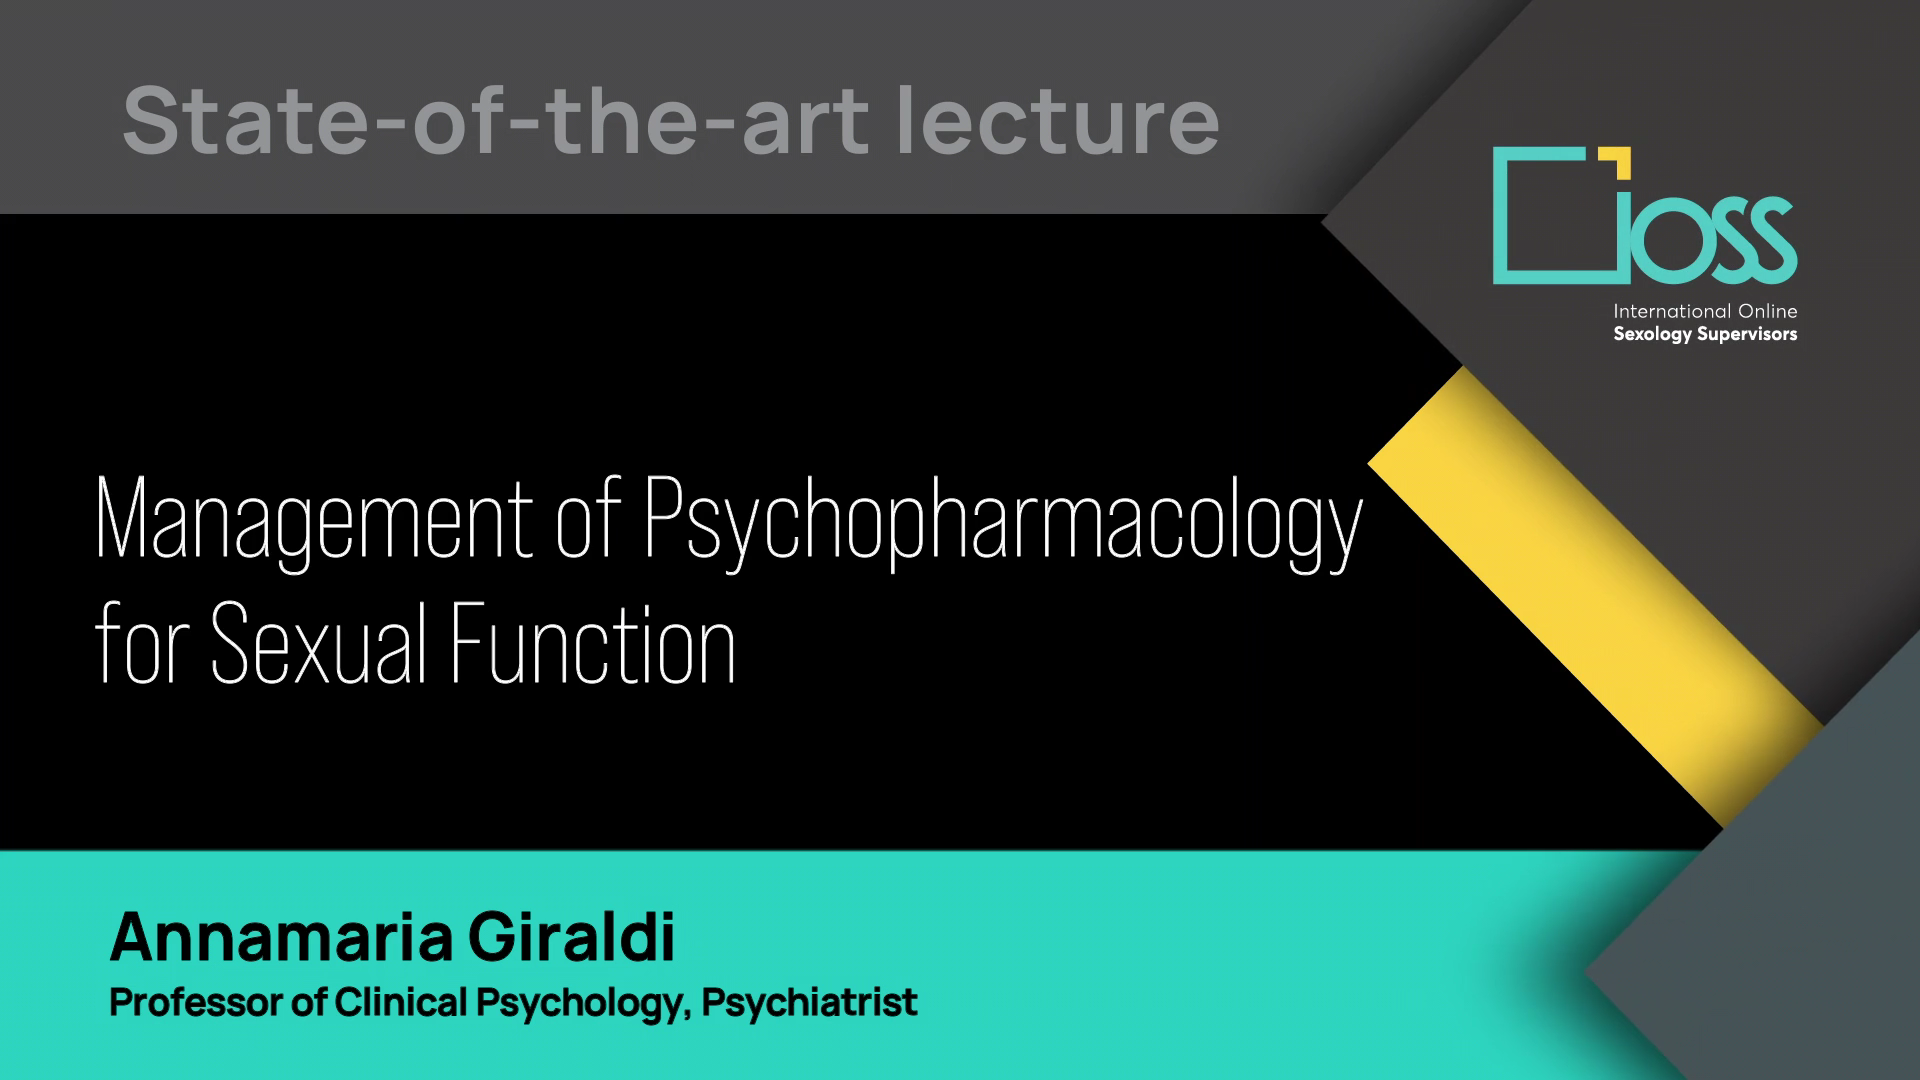 Full Video Management of Psychopharmachology for Sexual Function